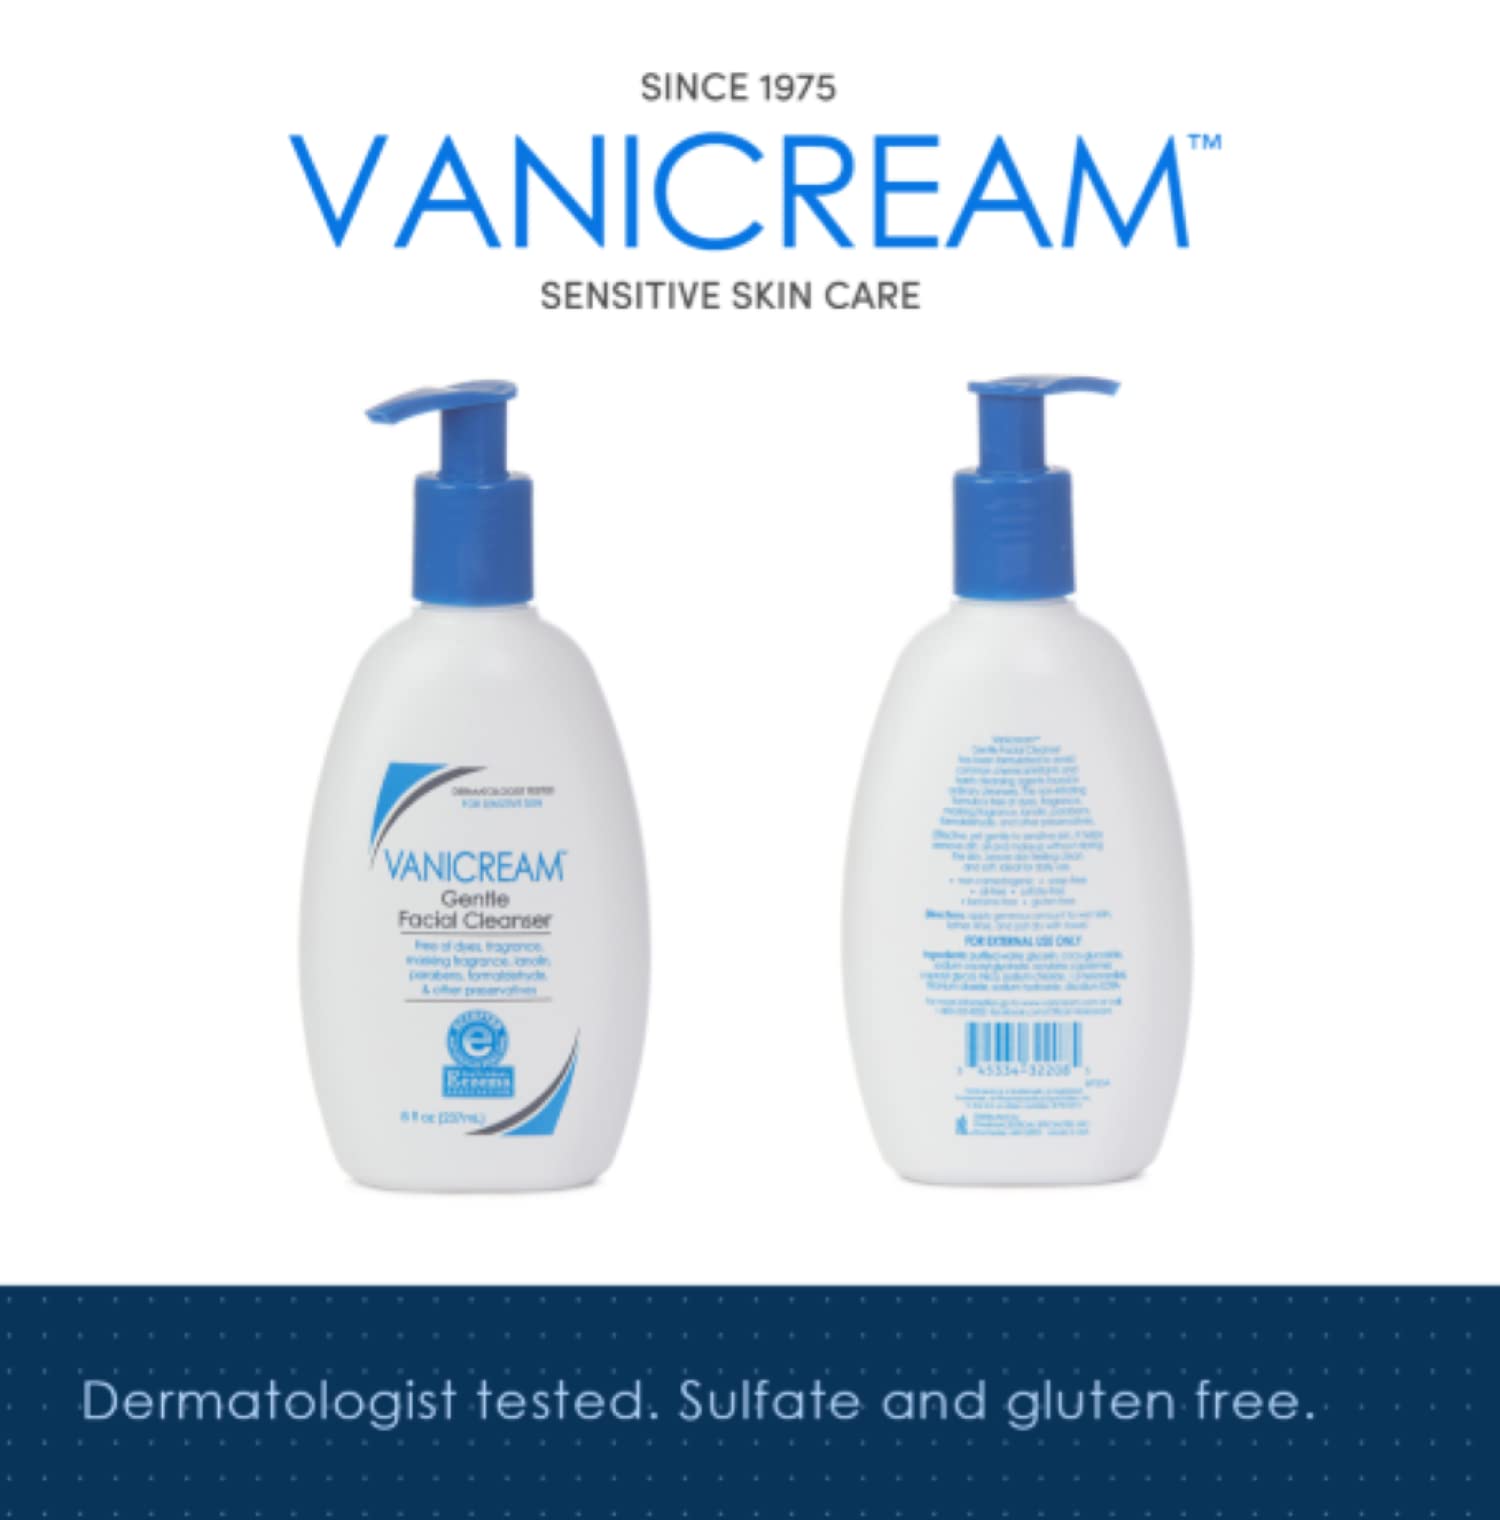 Vanicream Gentle Facial Cleanser with Pump Dispenser - 8 fl oz - Formulated Without Common Irritants for Those with Sensitive Skin